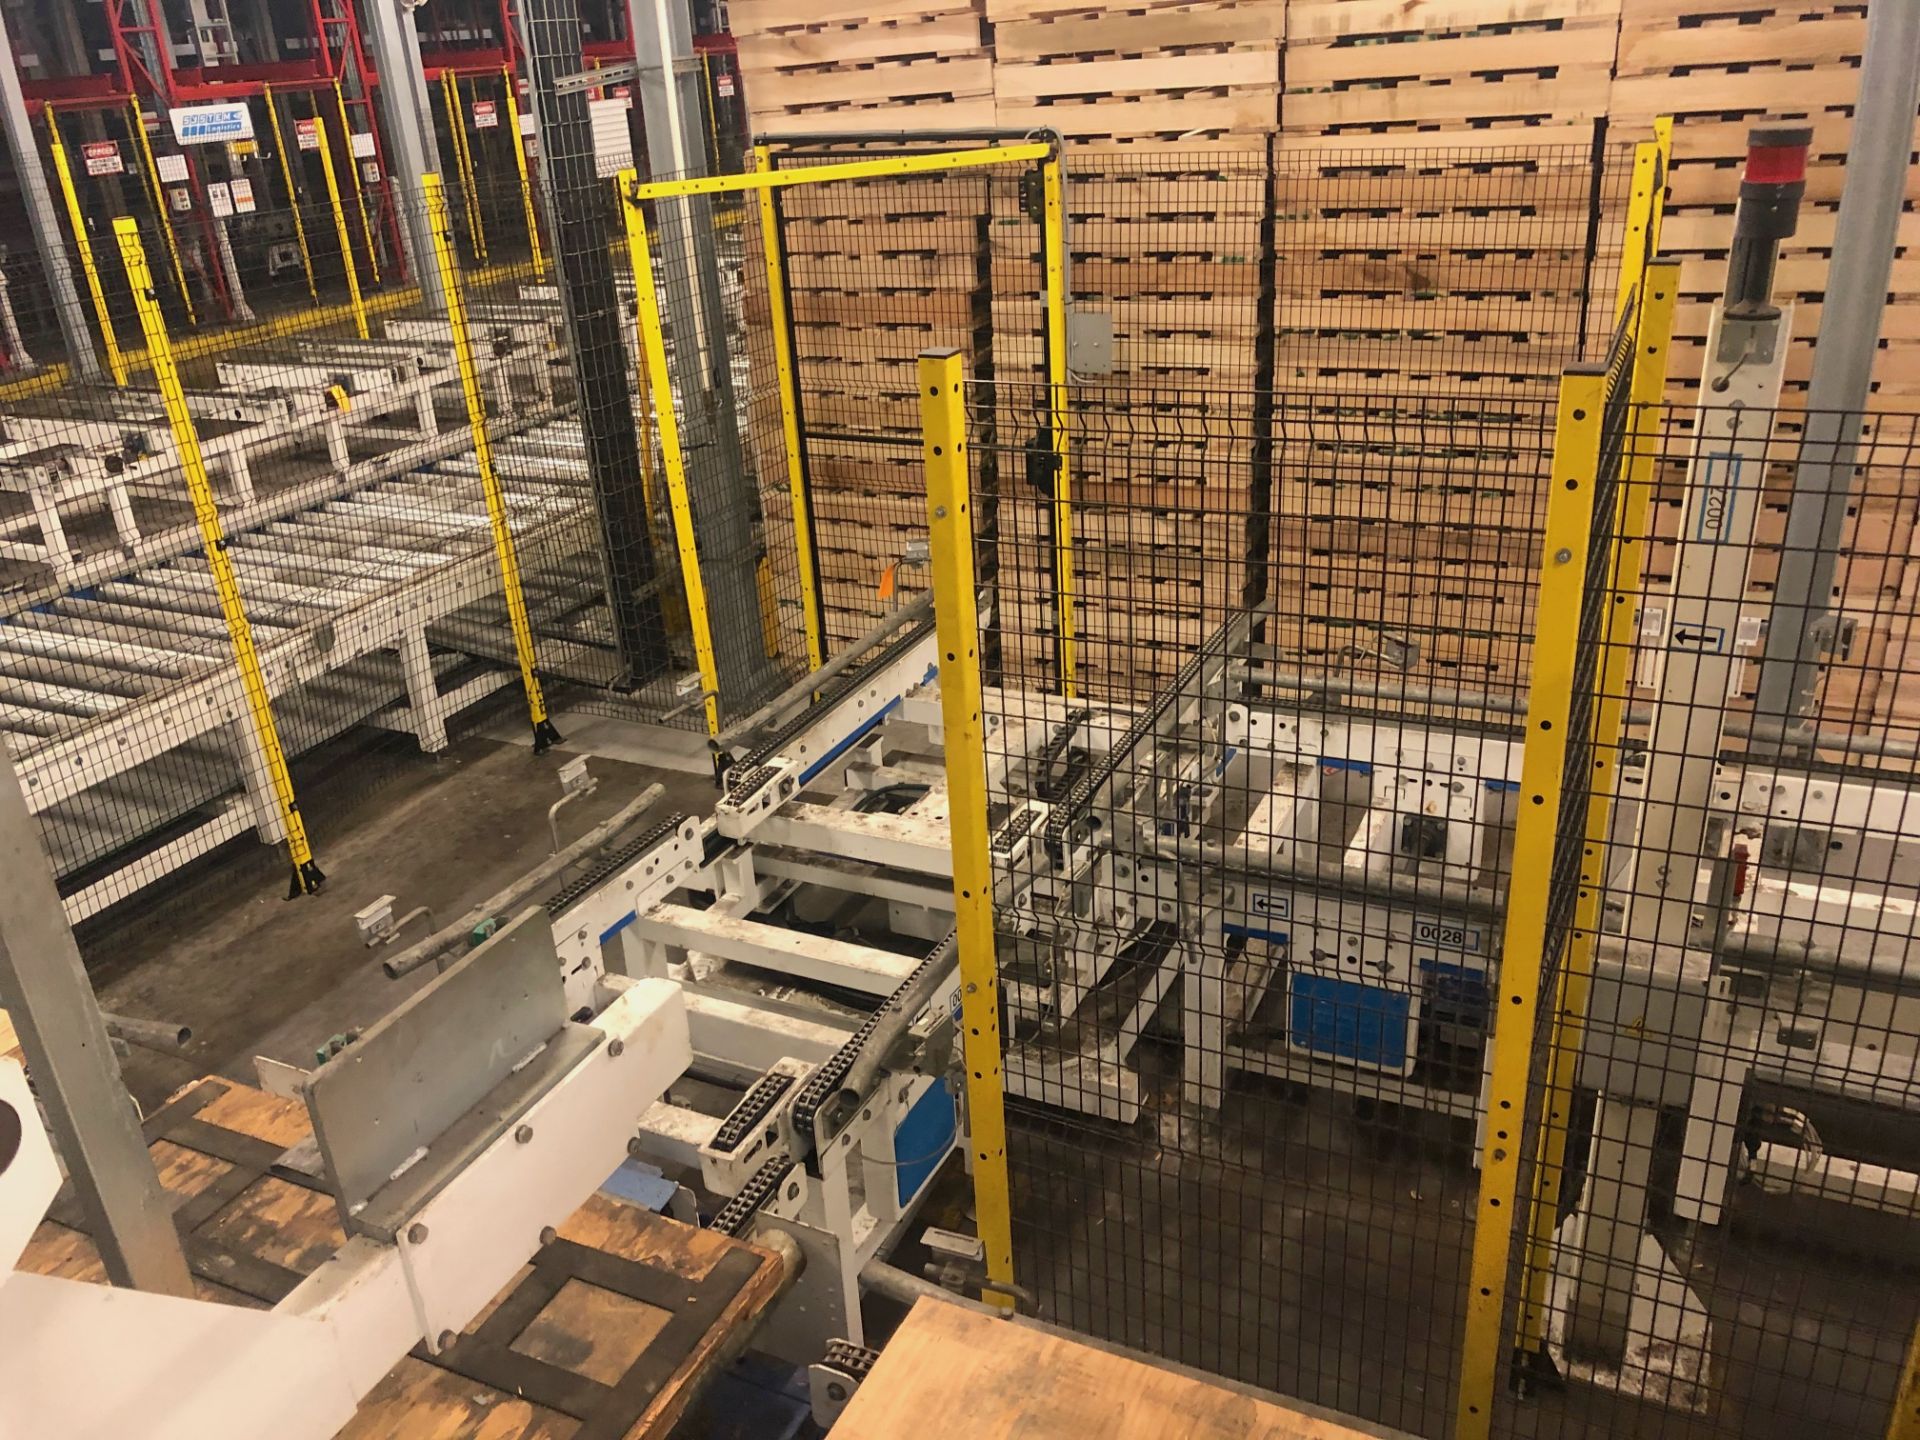 Pallet Dispenser Loading Area (to Feed Pallets to Robotic Palletizers) - Image 12 of 17